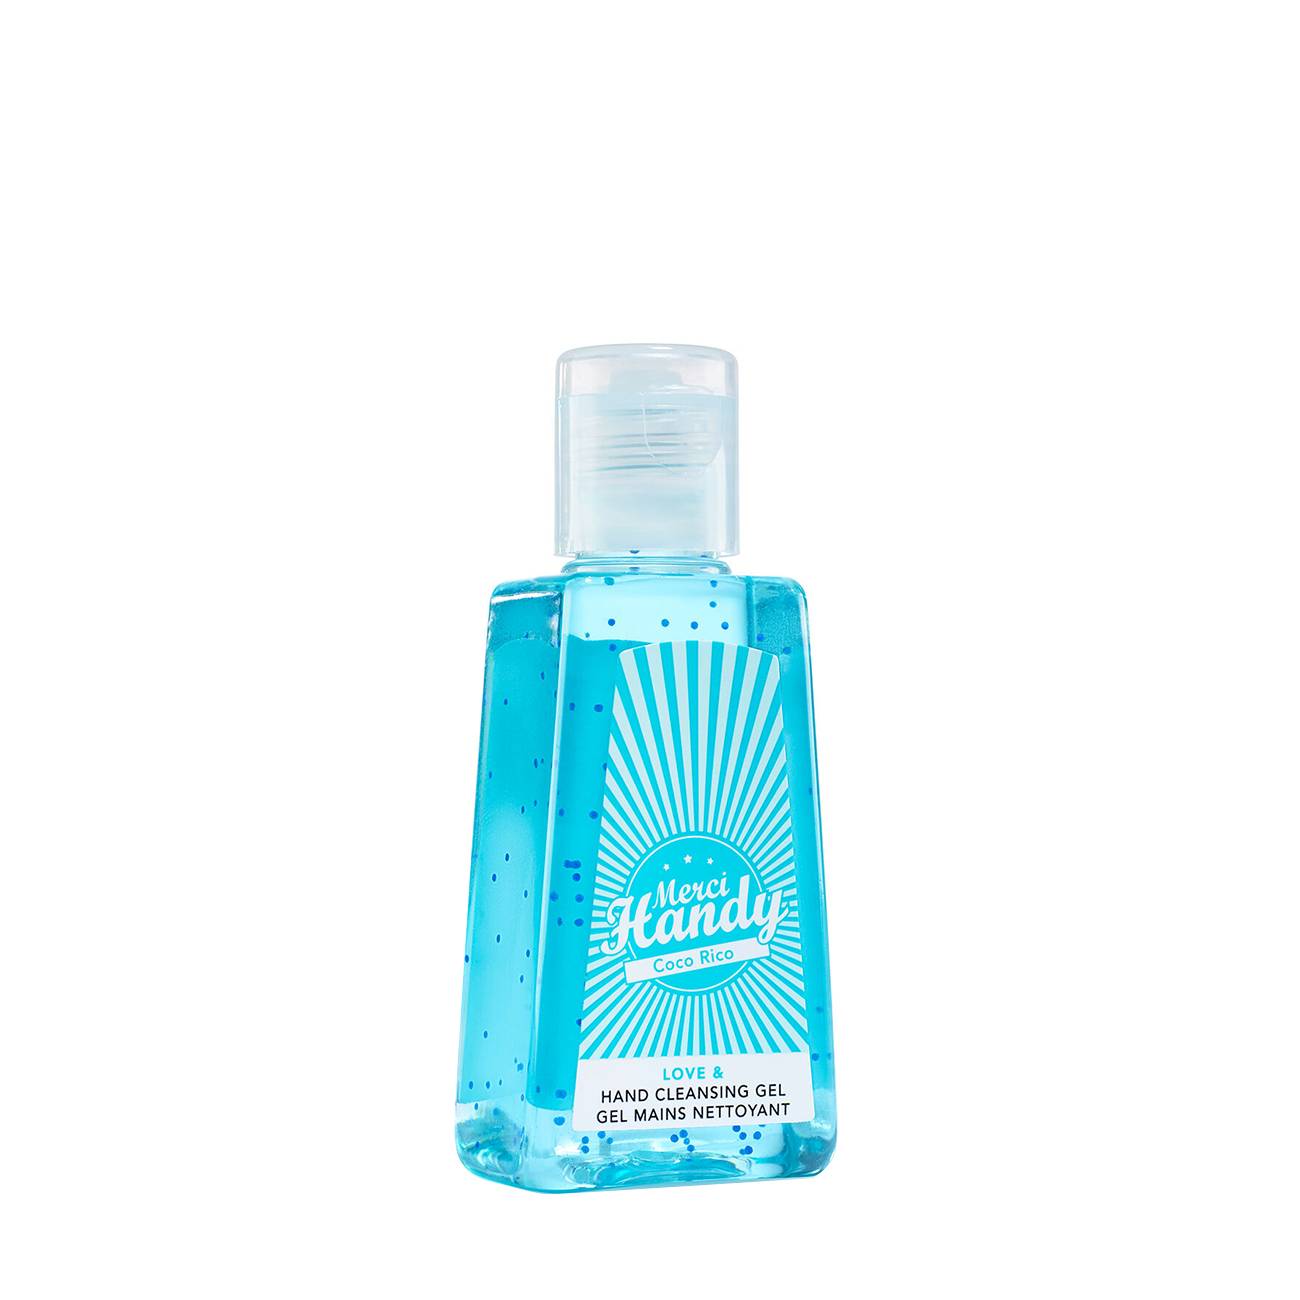 COCO RICO HAND CLEANSING GEL 30 ml